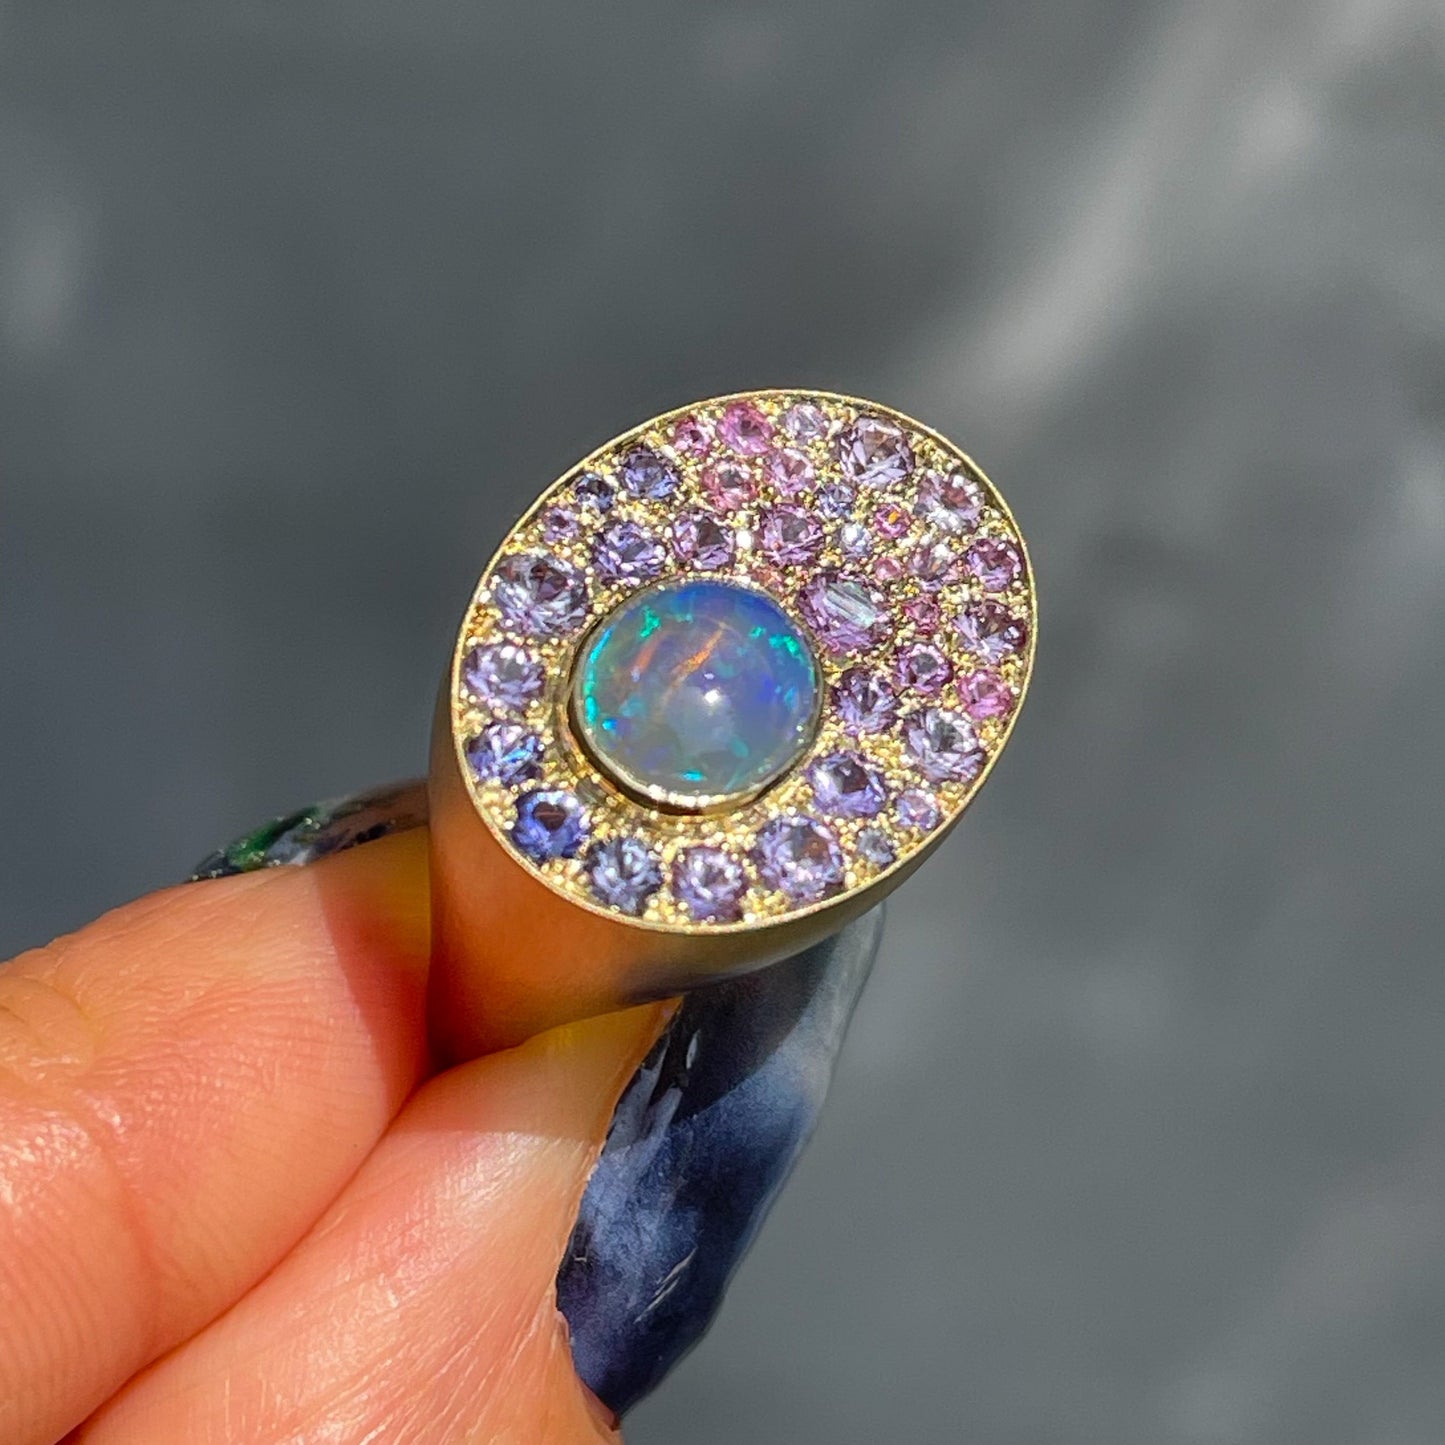 An Australian Opal Ring by NIXIN Jewelry held in front of a grey backdrop. An ombre sapphire ring made in yellow gold with an Australian Opal.